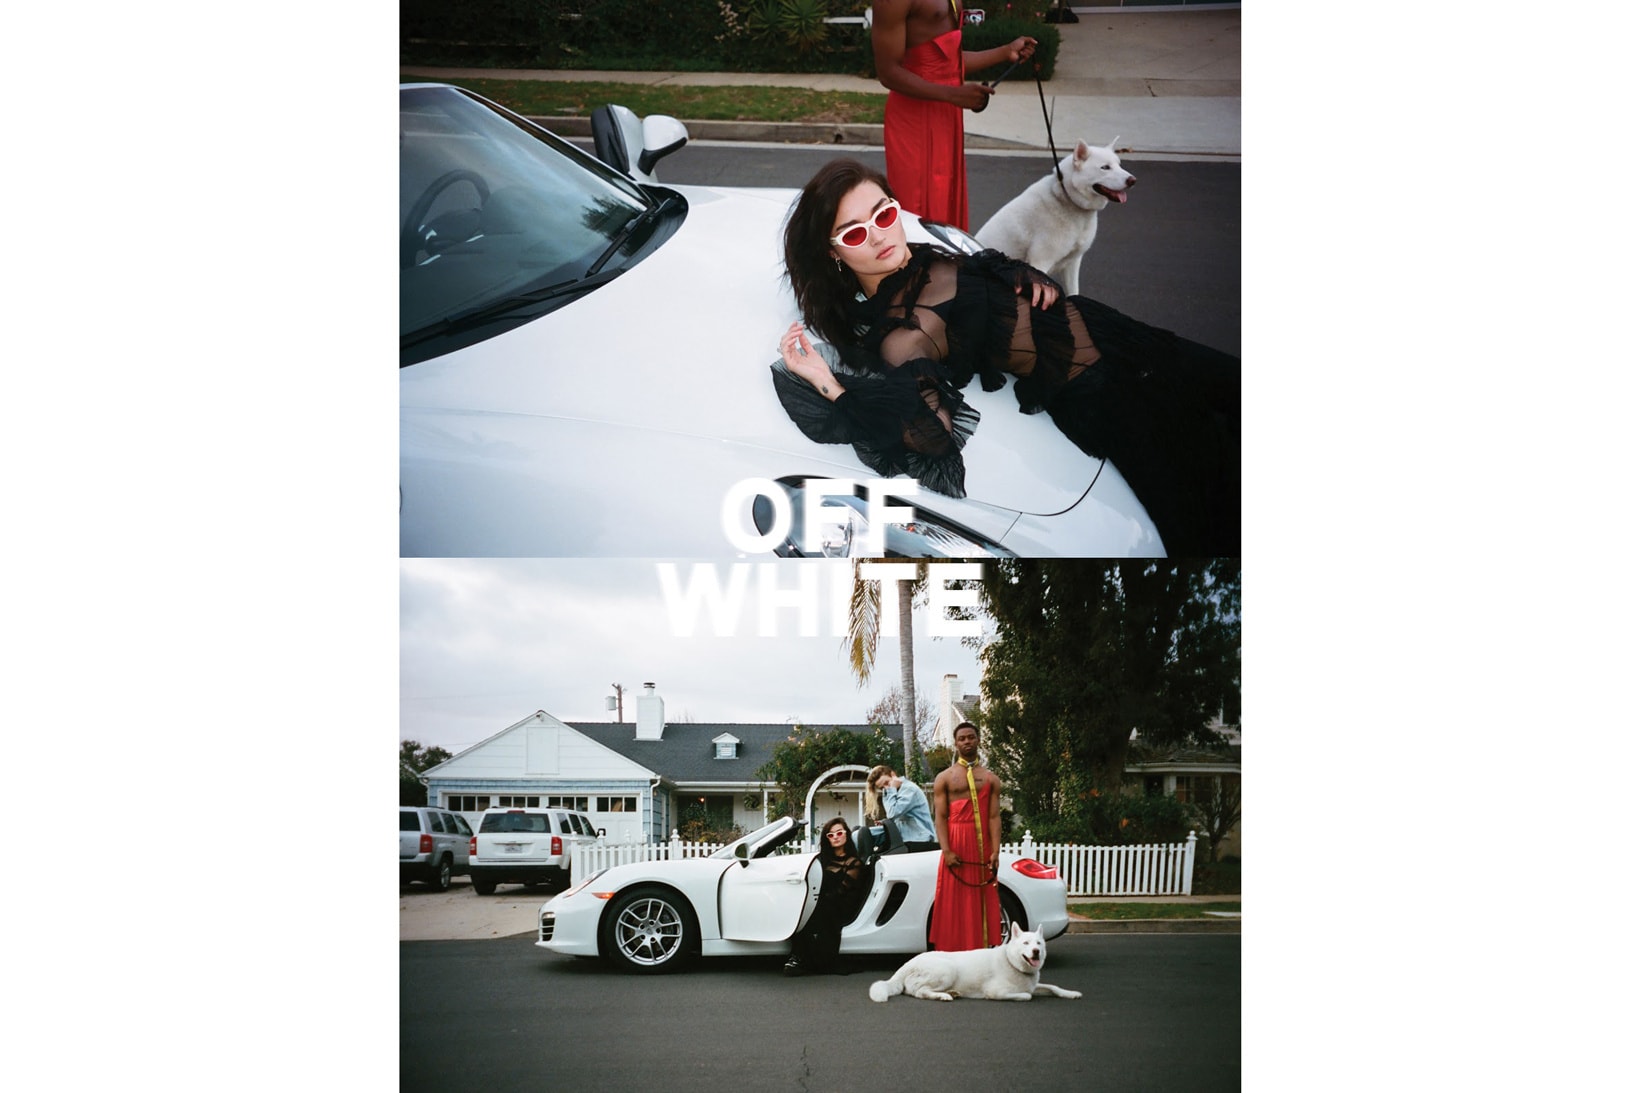 OFF-WHITE c/o VIRGIL ABLOH Launches a New Series of Striking Ads